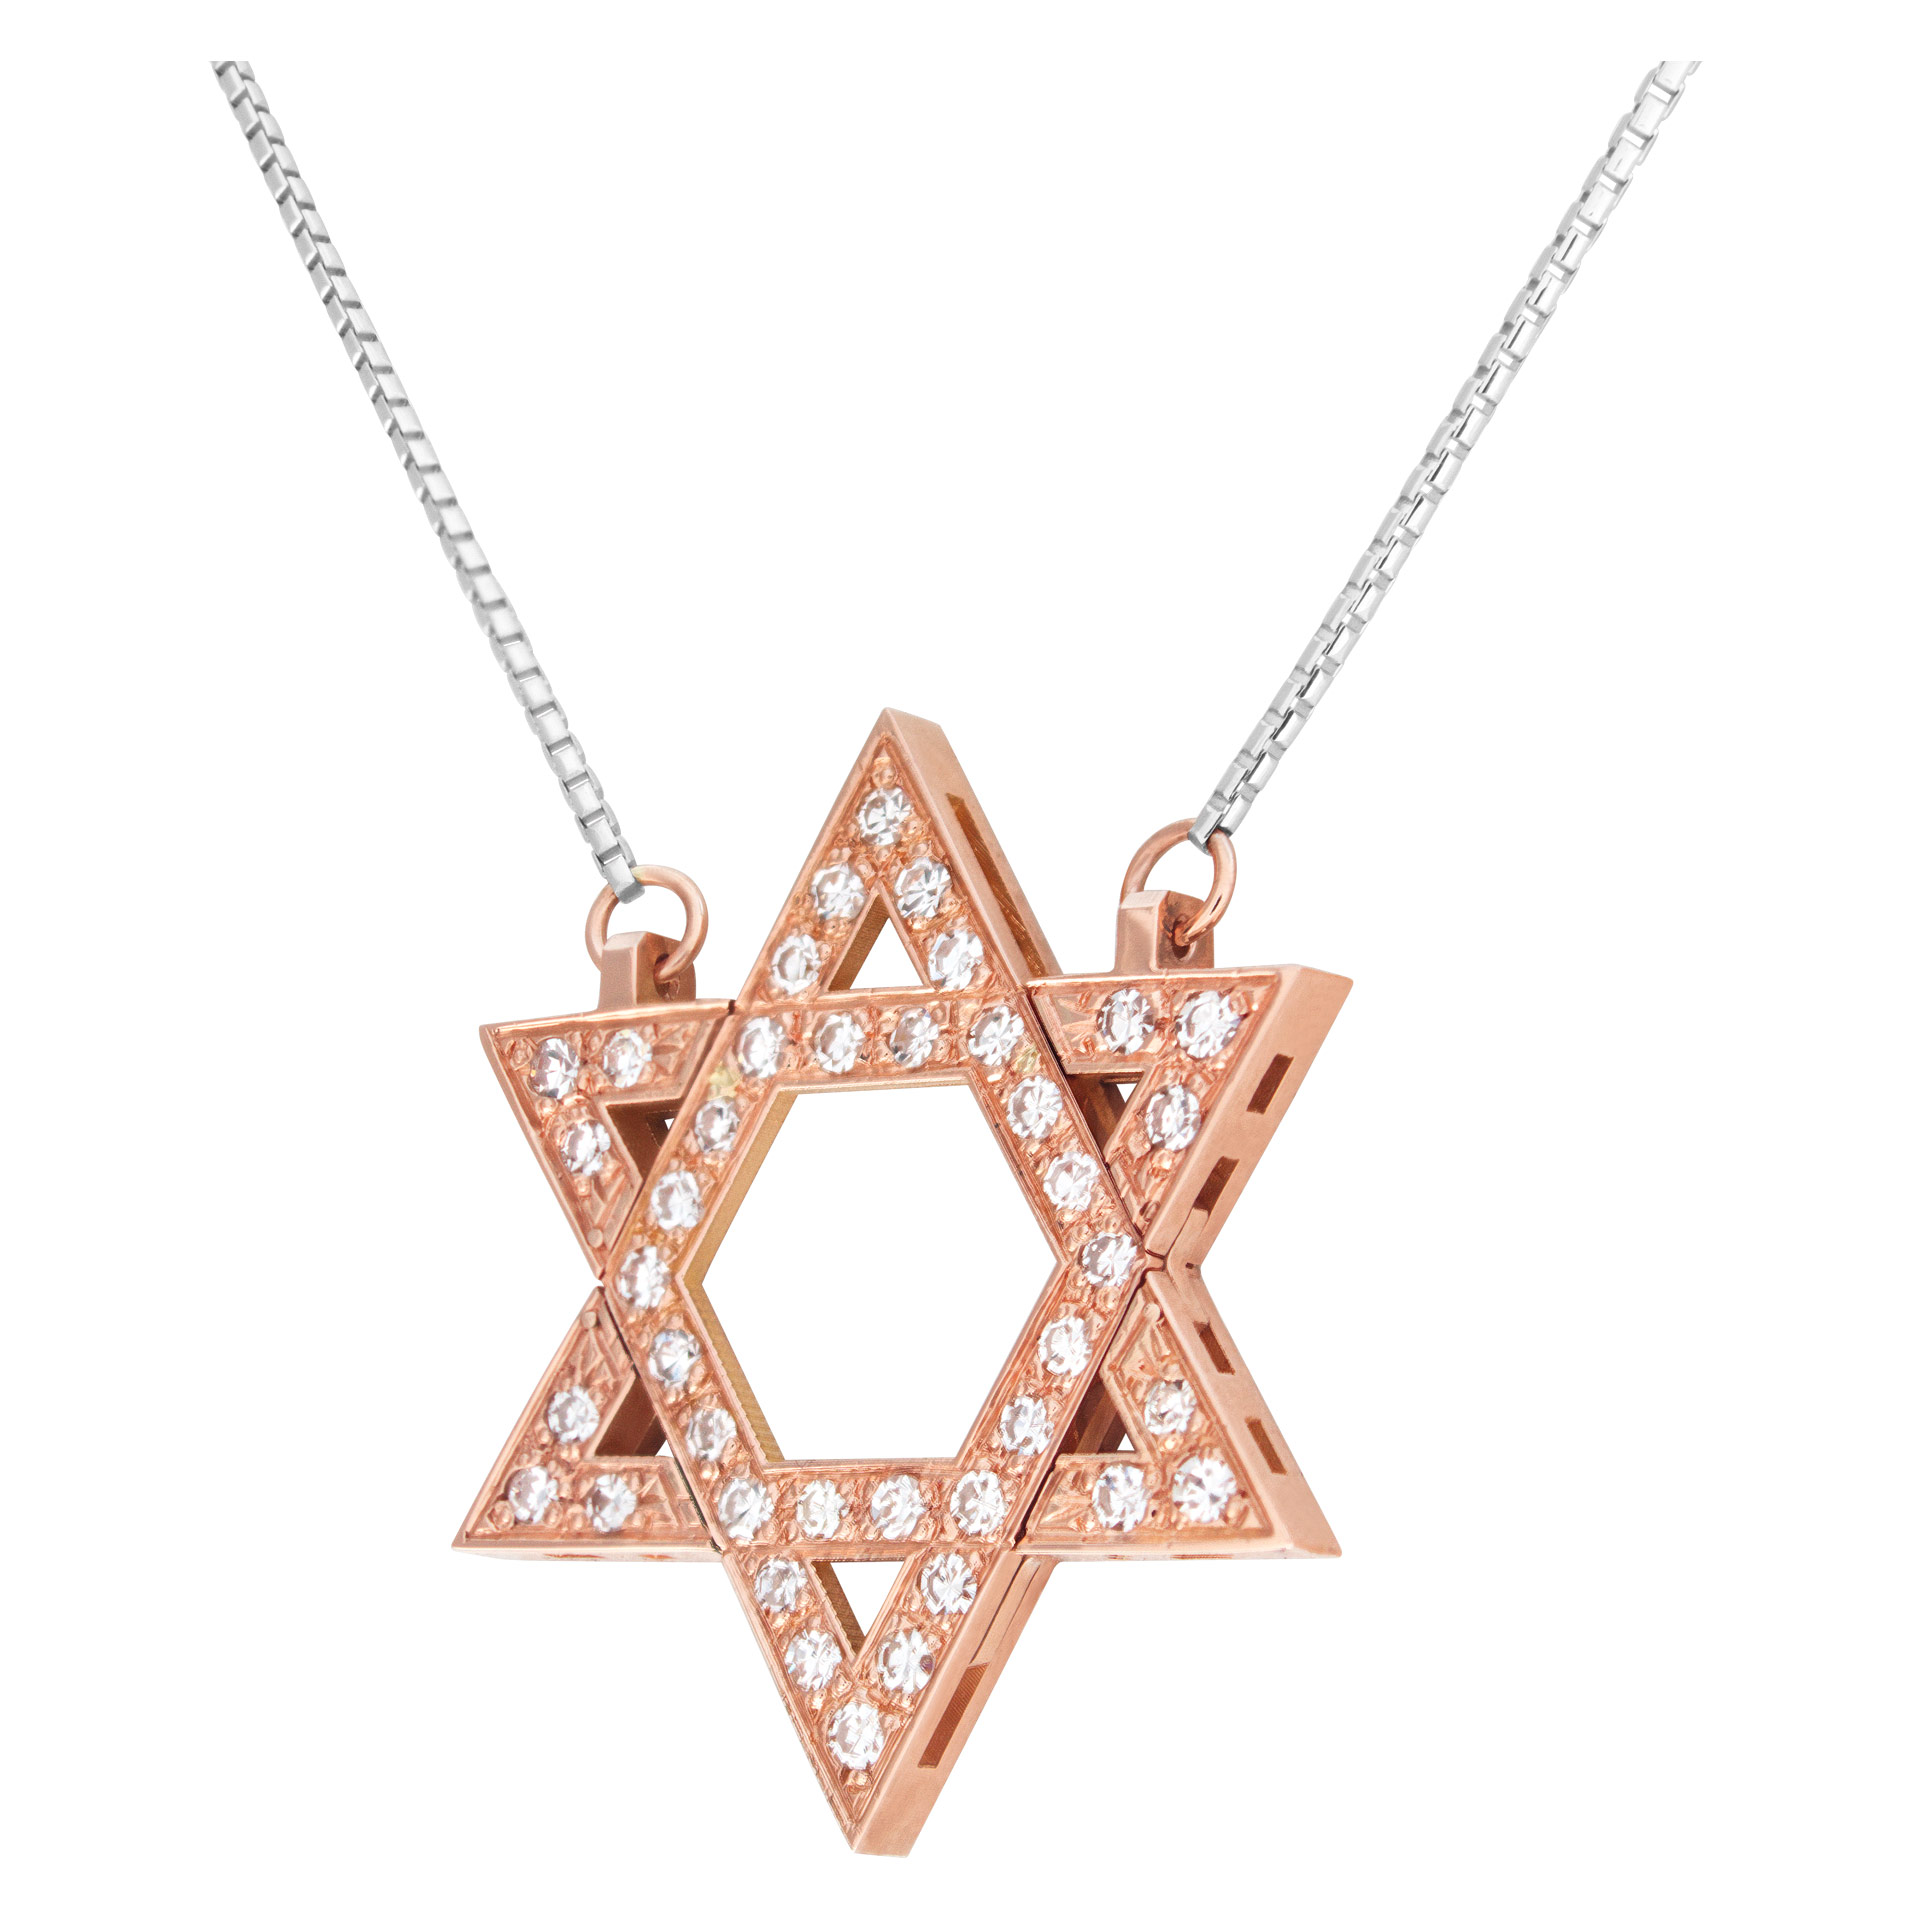 "Star of David" pendant with approximately 0.75 carat pave diamonds set in 18k rose gold with an 18k white gold chain (Stones) image 3